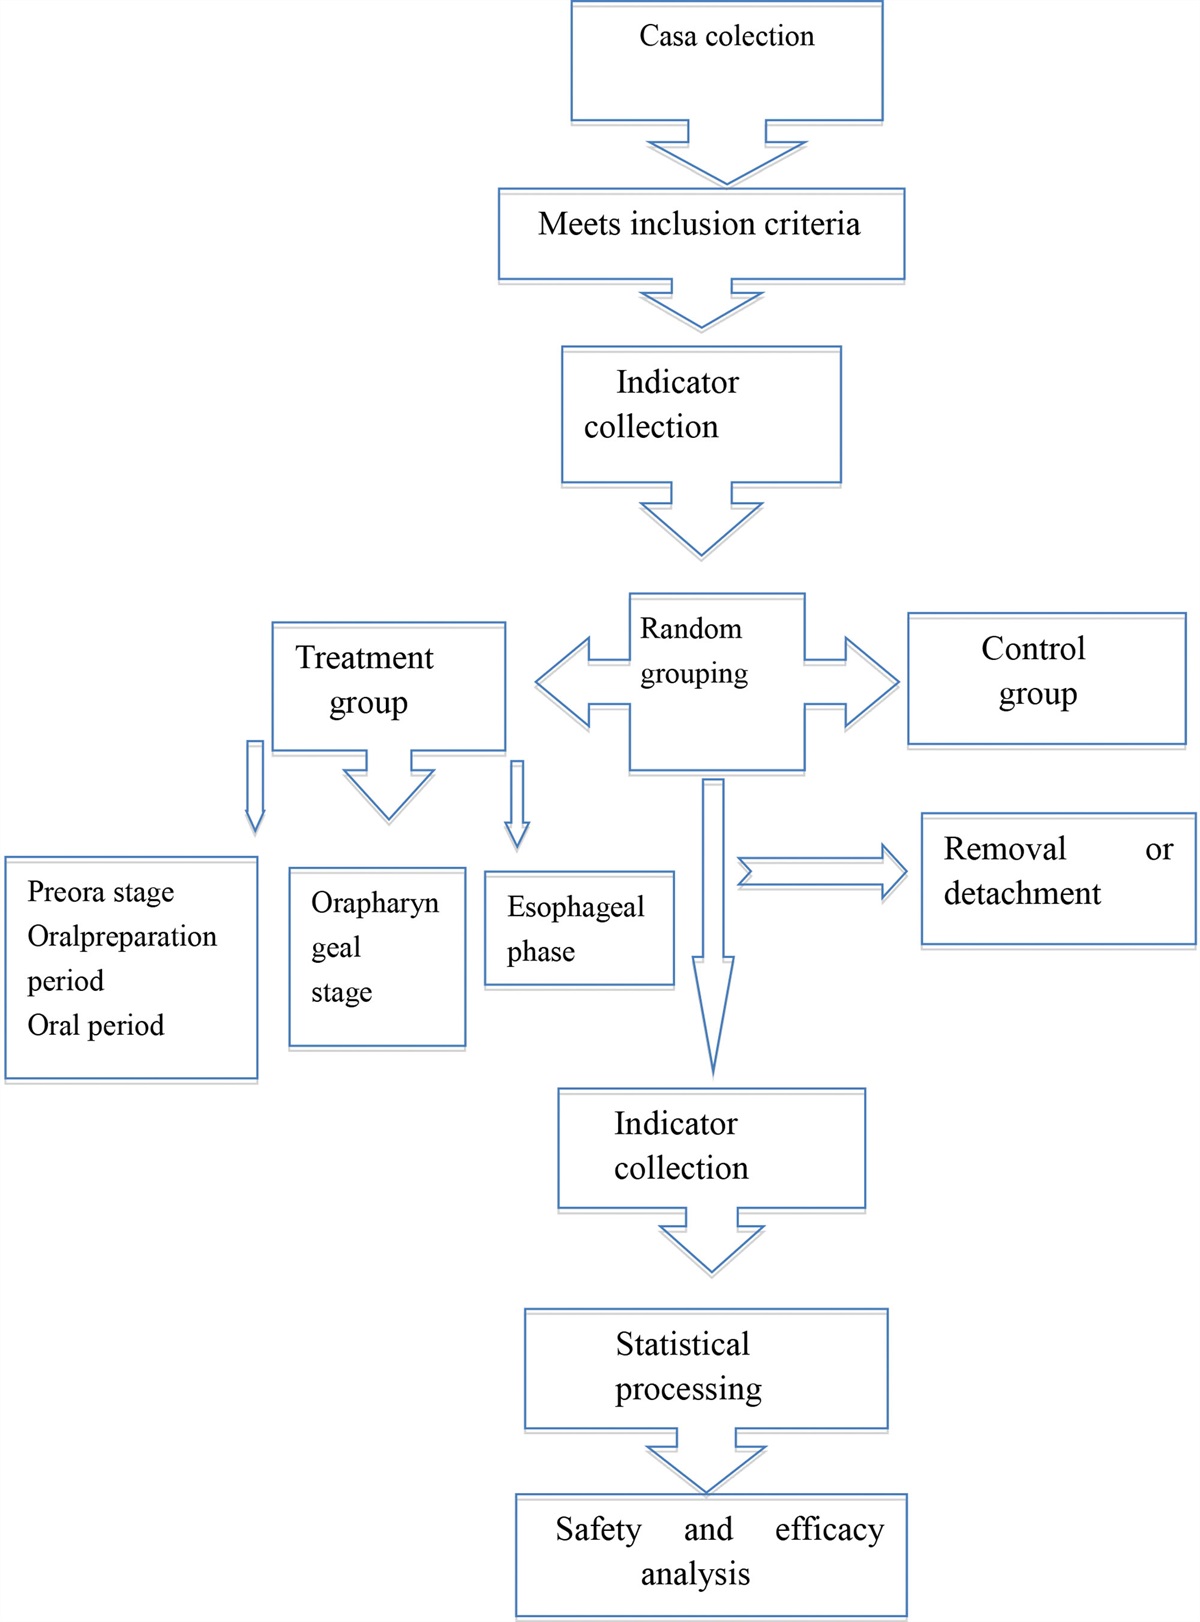 A randomized controlled study investigating the efficacy of electro-acupuncture and exercise-based swallowing rehabilitation for post-stroke dysphagia: Impacts on brainstem auditory evoked potentials and cerebral blood flow